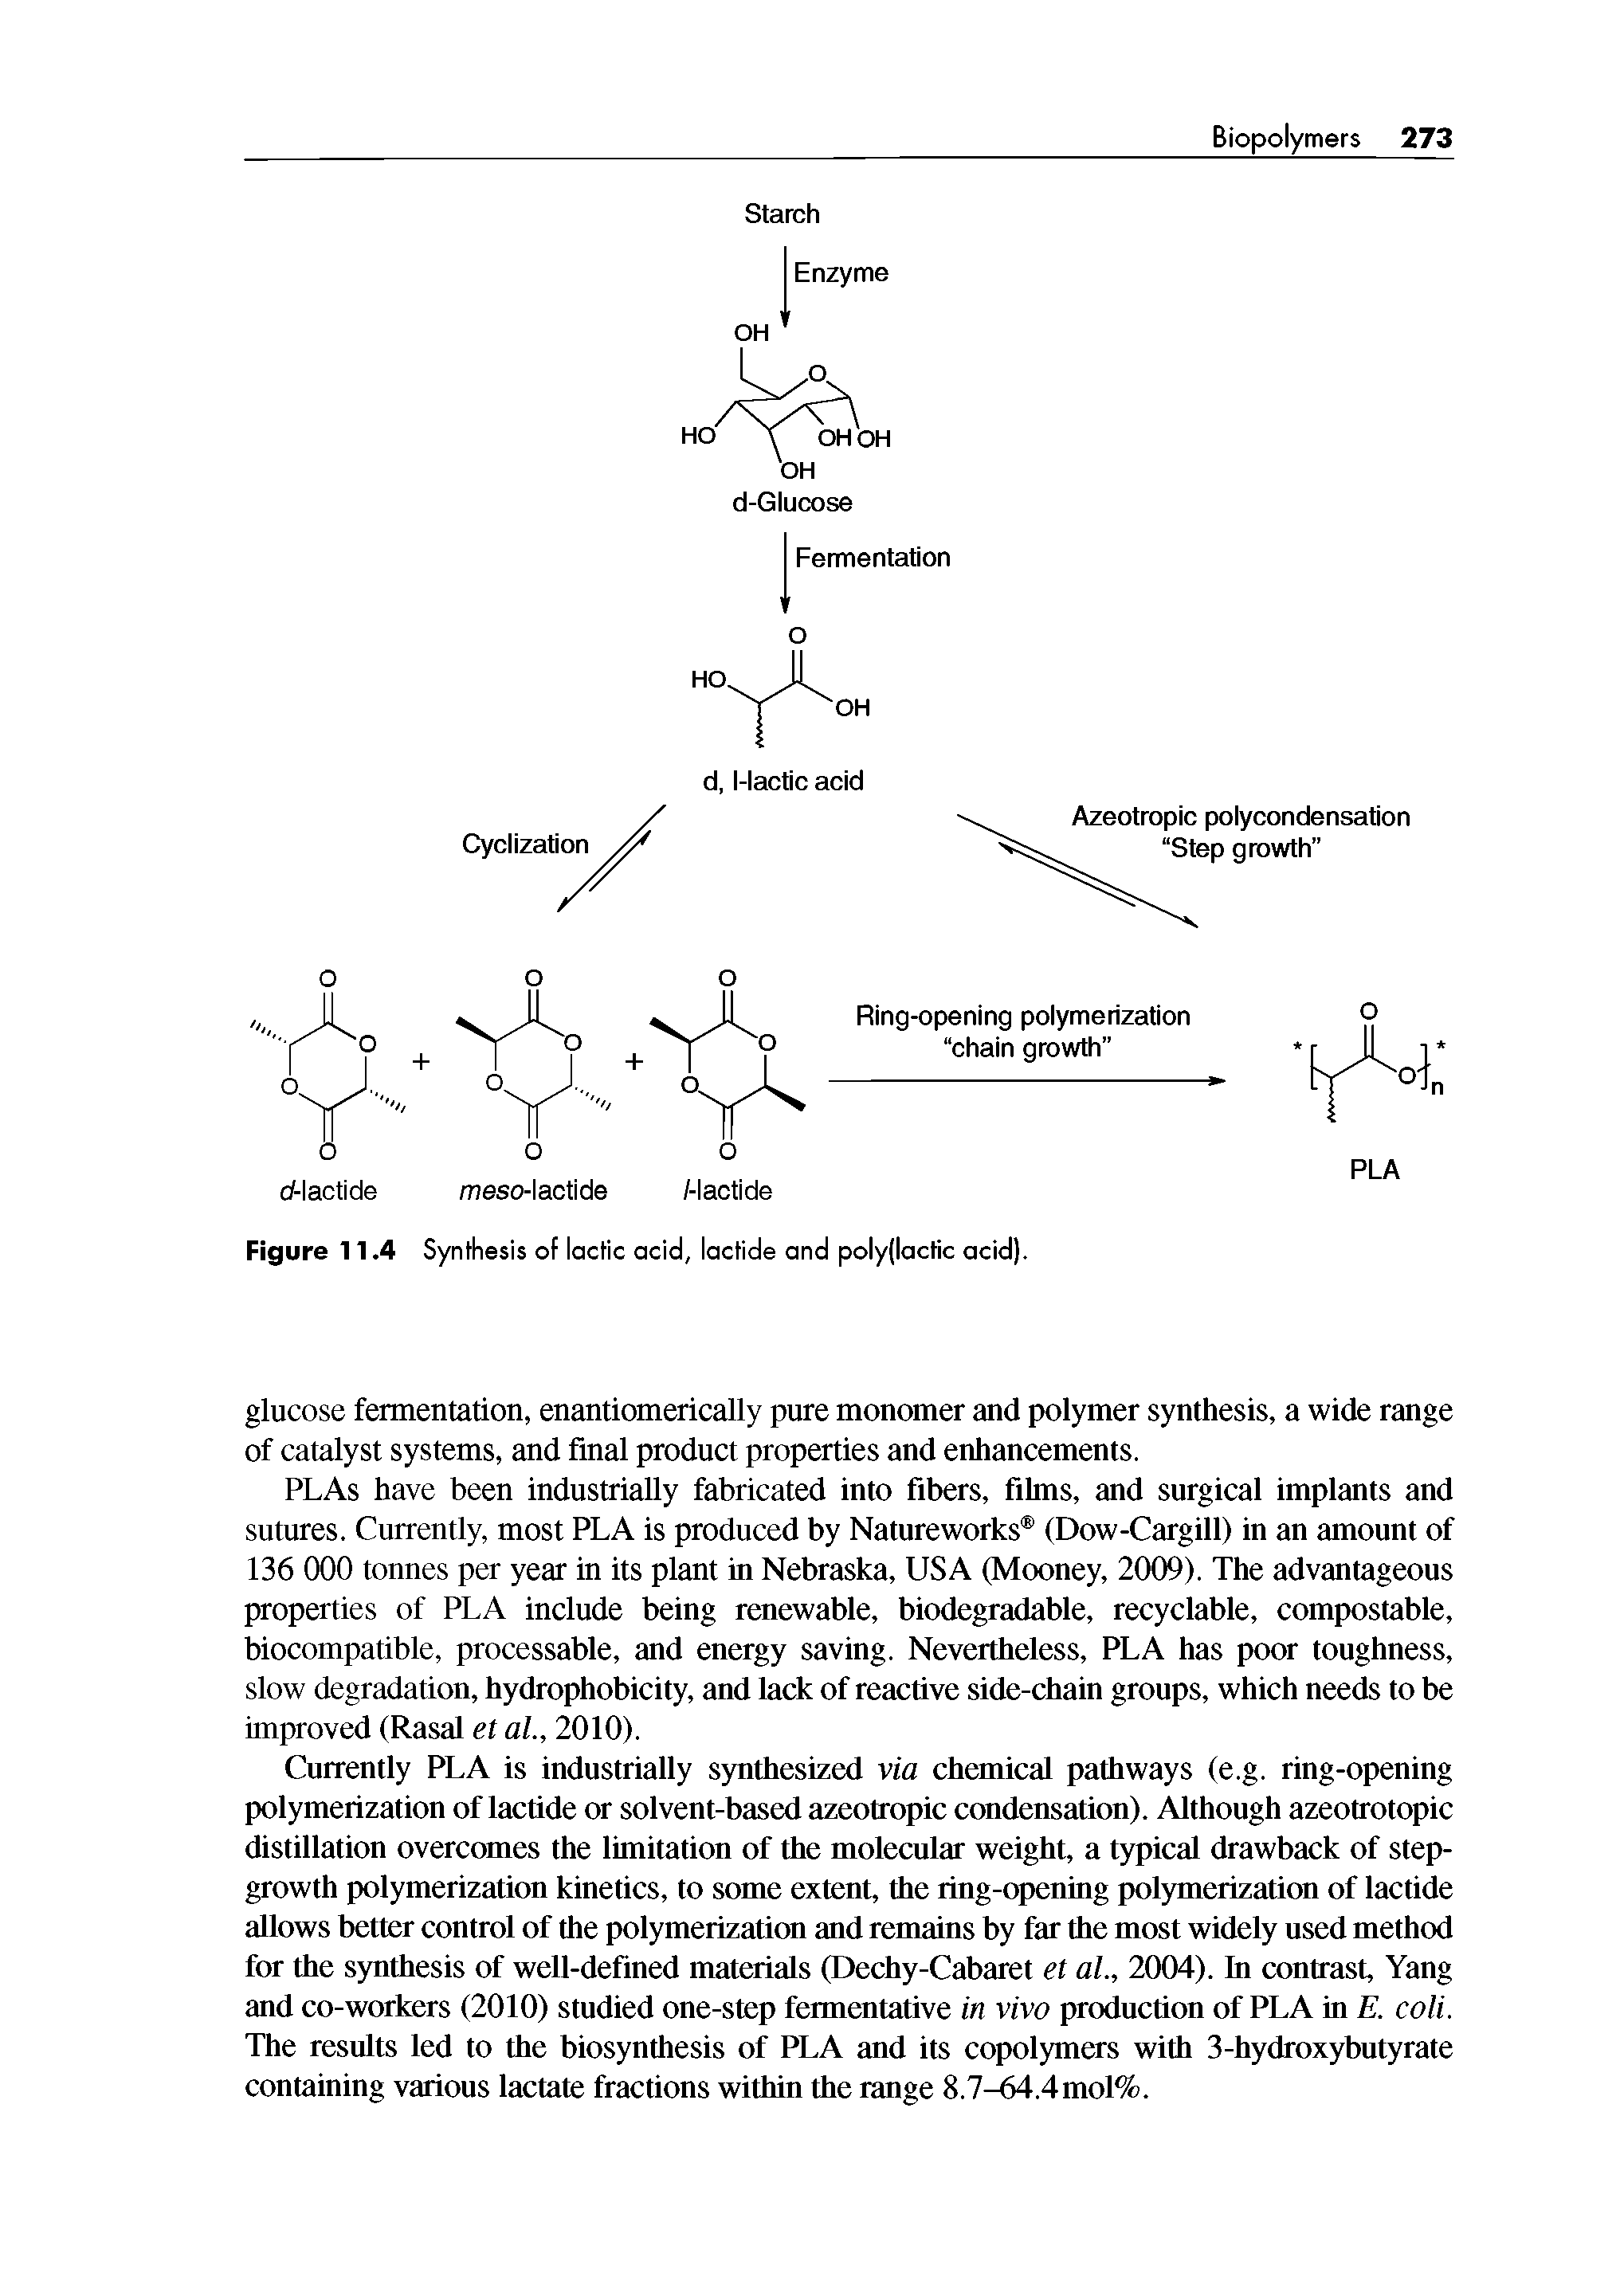 Figure 11.4 Synthesis of lactic acid, lactide and polyjlaclic acid).